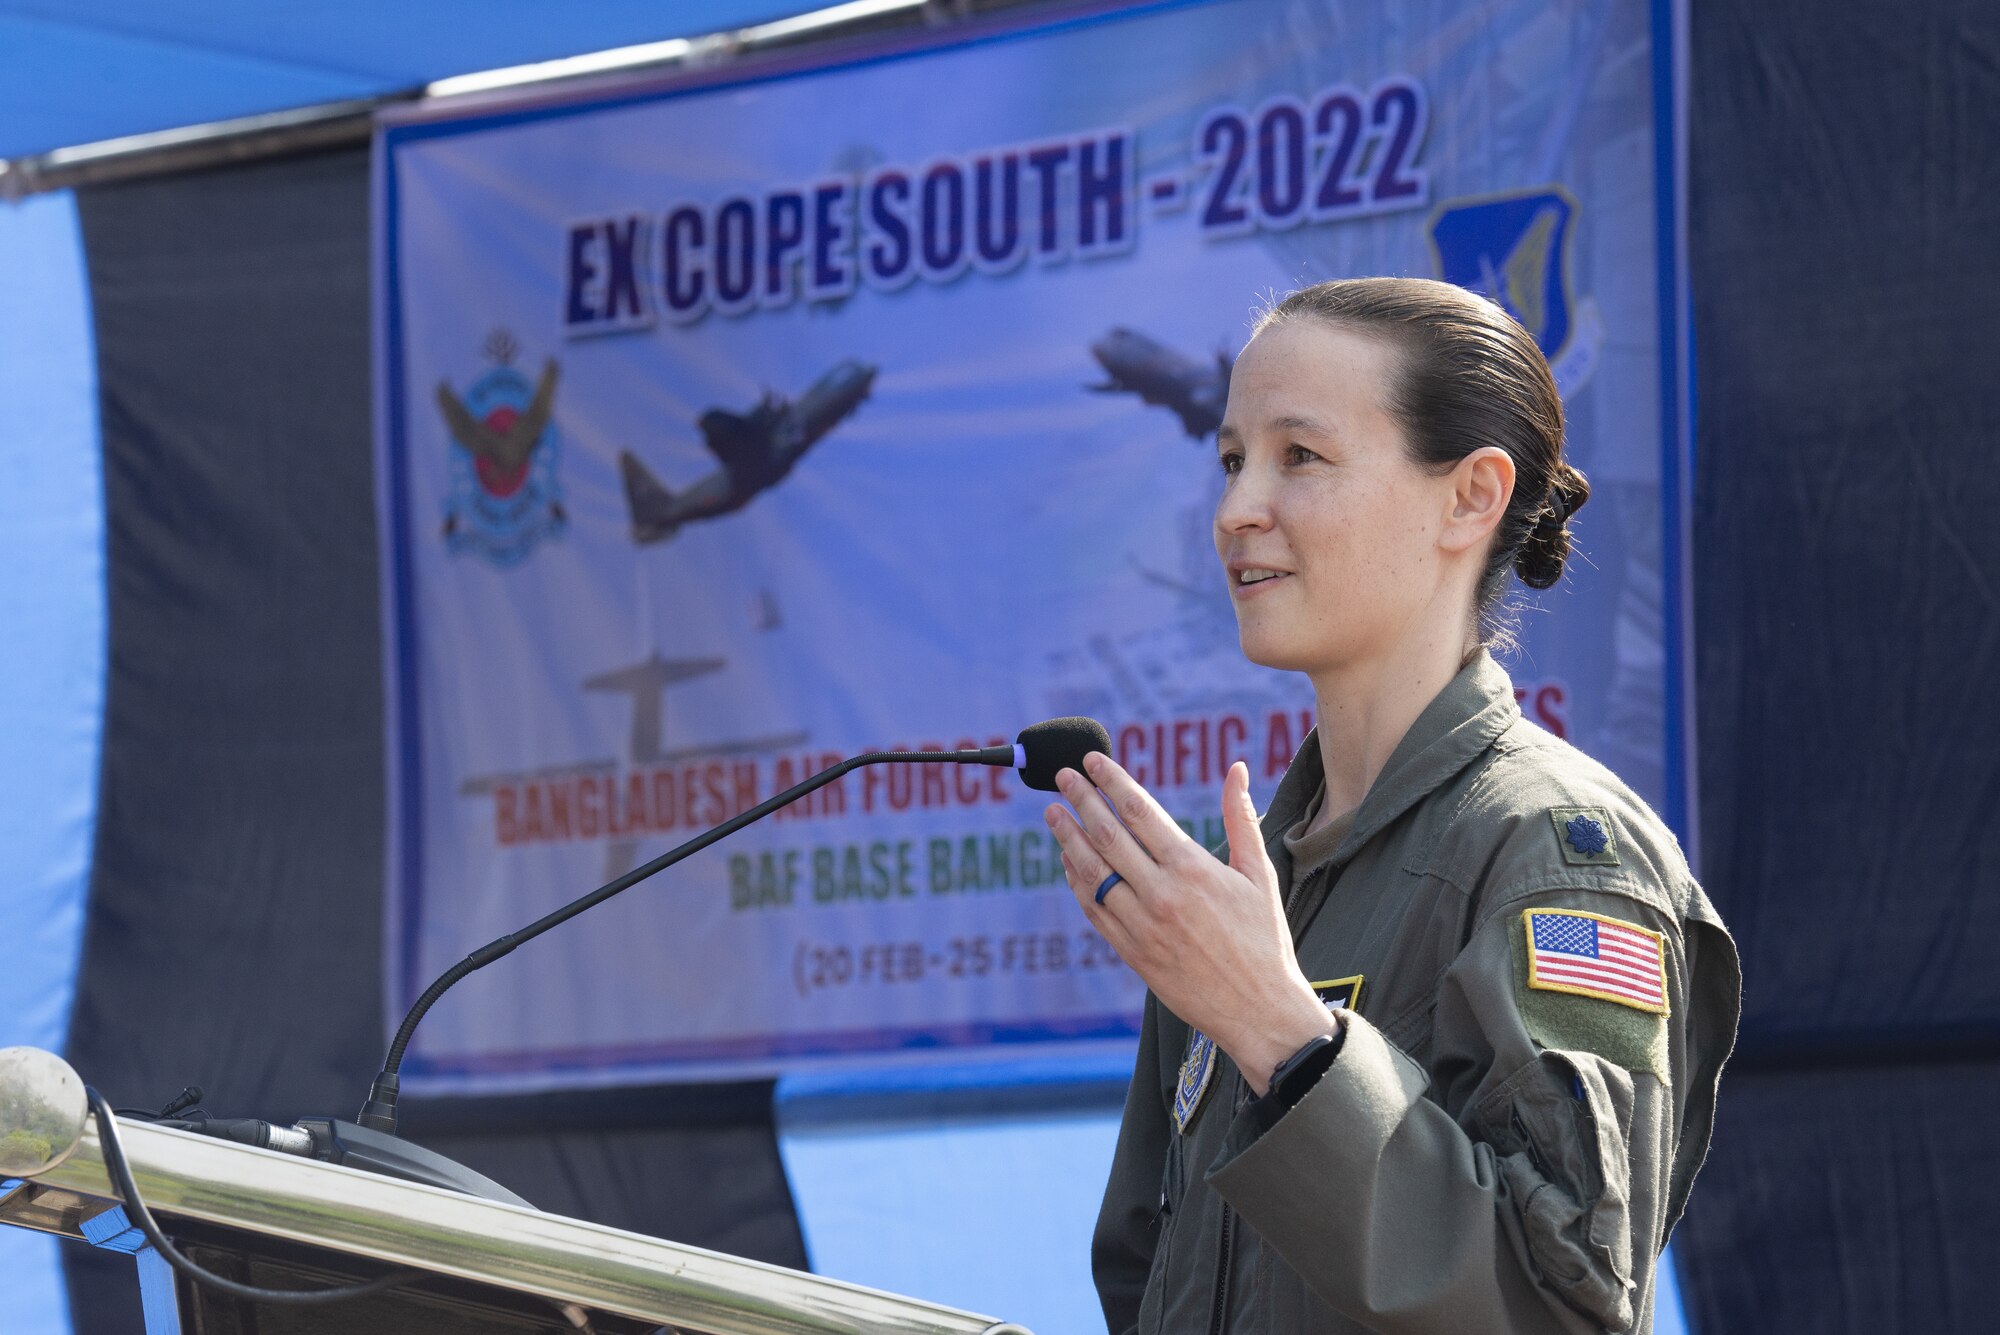 U.S. Air Force Lt. Col. Kira Coffey, 36th Expeditionary Airlift Squadron Commander, addresses the importance of the partnership between the U.S. Air Force and Bangladesh Air Force (BAF) to participants of Exercise Cope South 2022 during the exercise’s opening ceremony Feb. 19, 2022, at BAF Base Bangabandhu, Bangladesh.